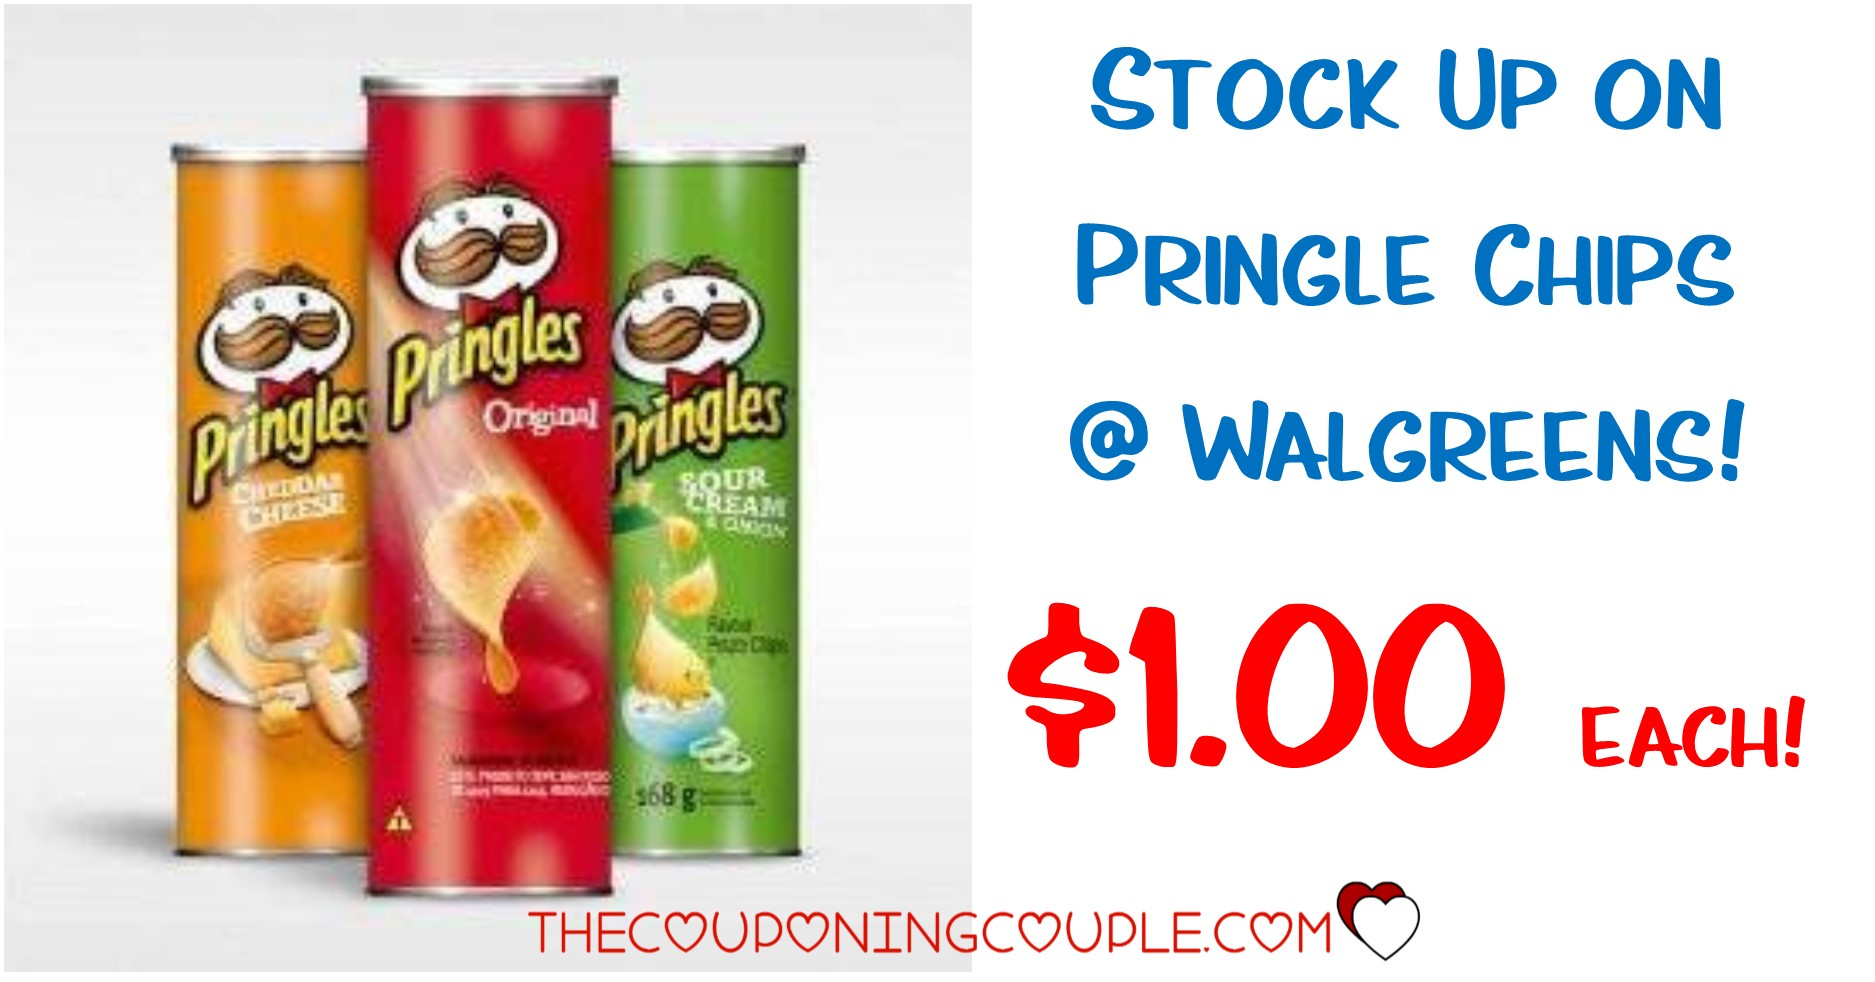 Cheap Deal On Pringles Chips @ Walgreens! $1.00 Each - Free Printable Pringles Coupons